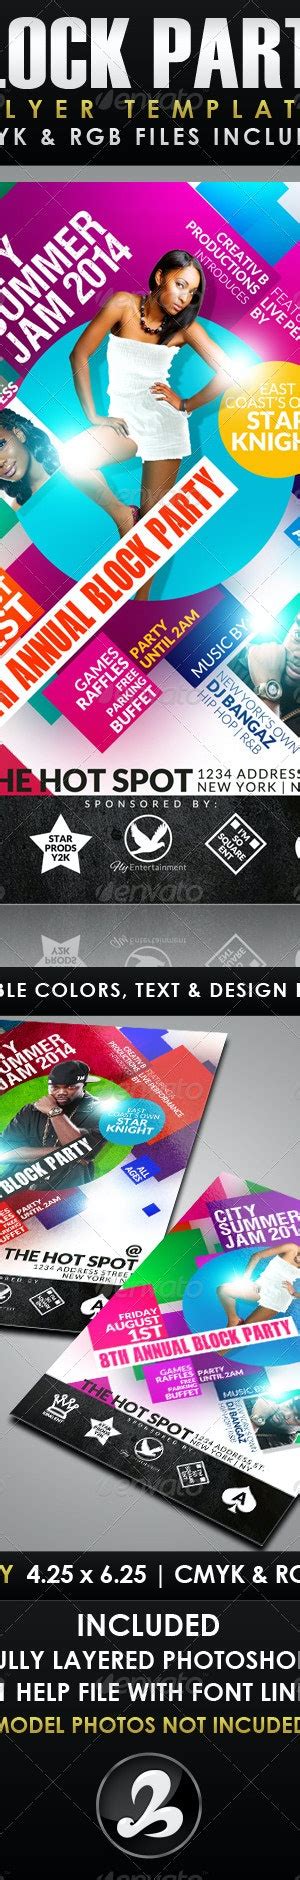 block party flyer template  creativb graphicriver